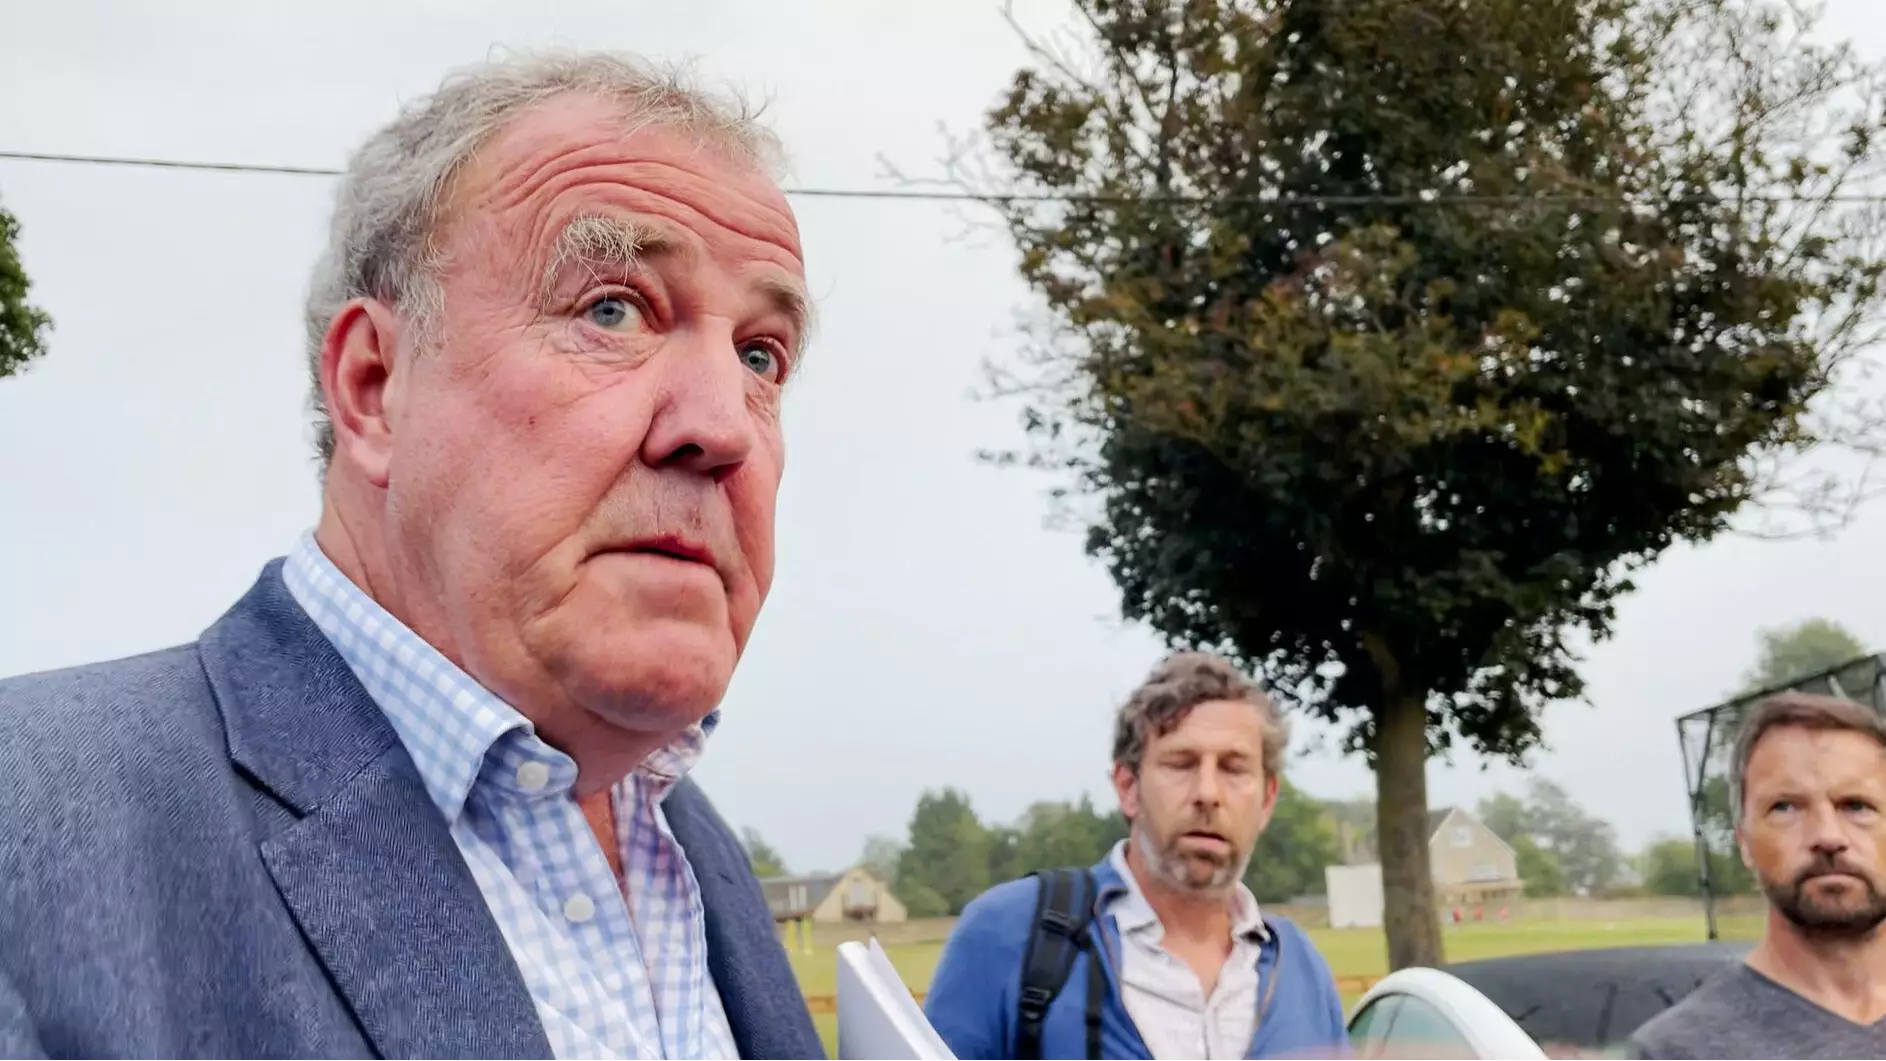 Jeremy Clarkson Claims Emergency Call Operator Threatened To Report Him For 'Racist Behaviour'